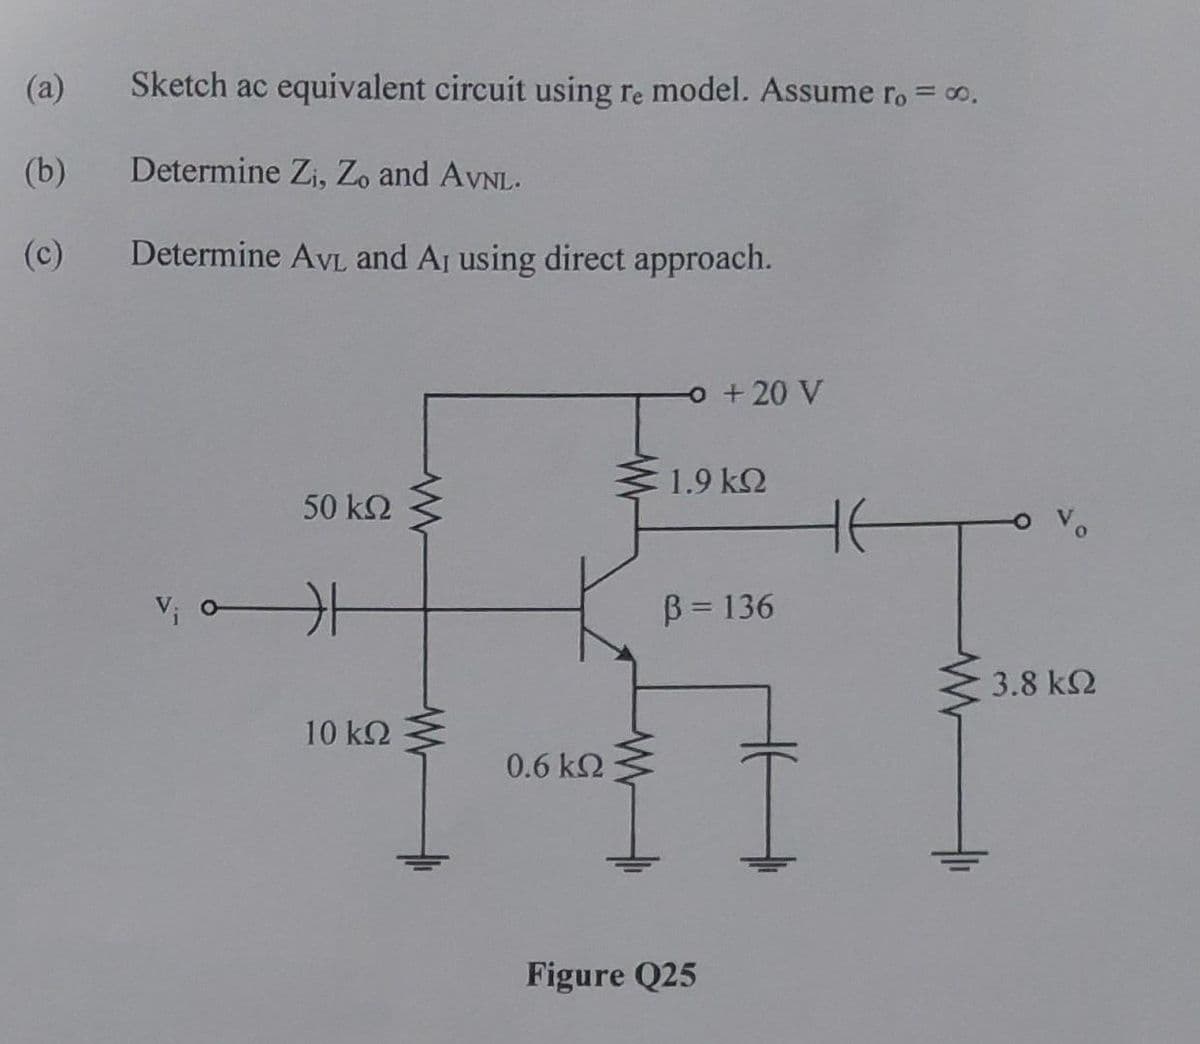 (a)
(b)
Sketch ac equivalent circuit using re model. Assume ro = ∞o.
Determine Zi, Zo and AVNL.
Determine AVL and A₁ using direct approach.
50 ΚΩ
V₁0 H
10 ΚΩ
0.6 ΚΩ
-o + 20 V
1.9 ΚΩ
B = 136
Figure Q25
не
3.8 ΚΩ